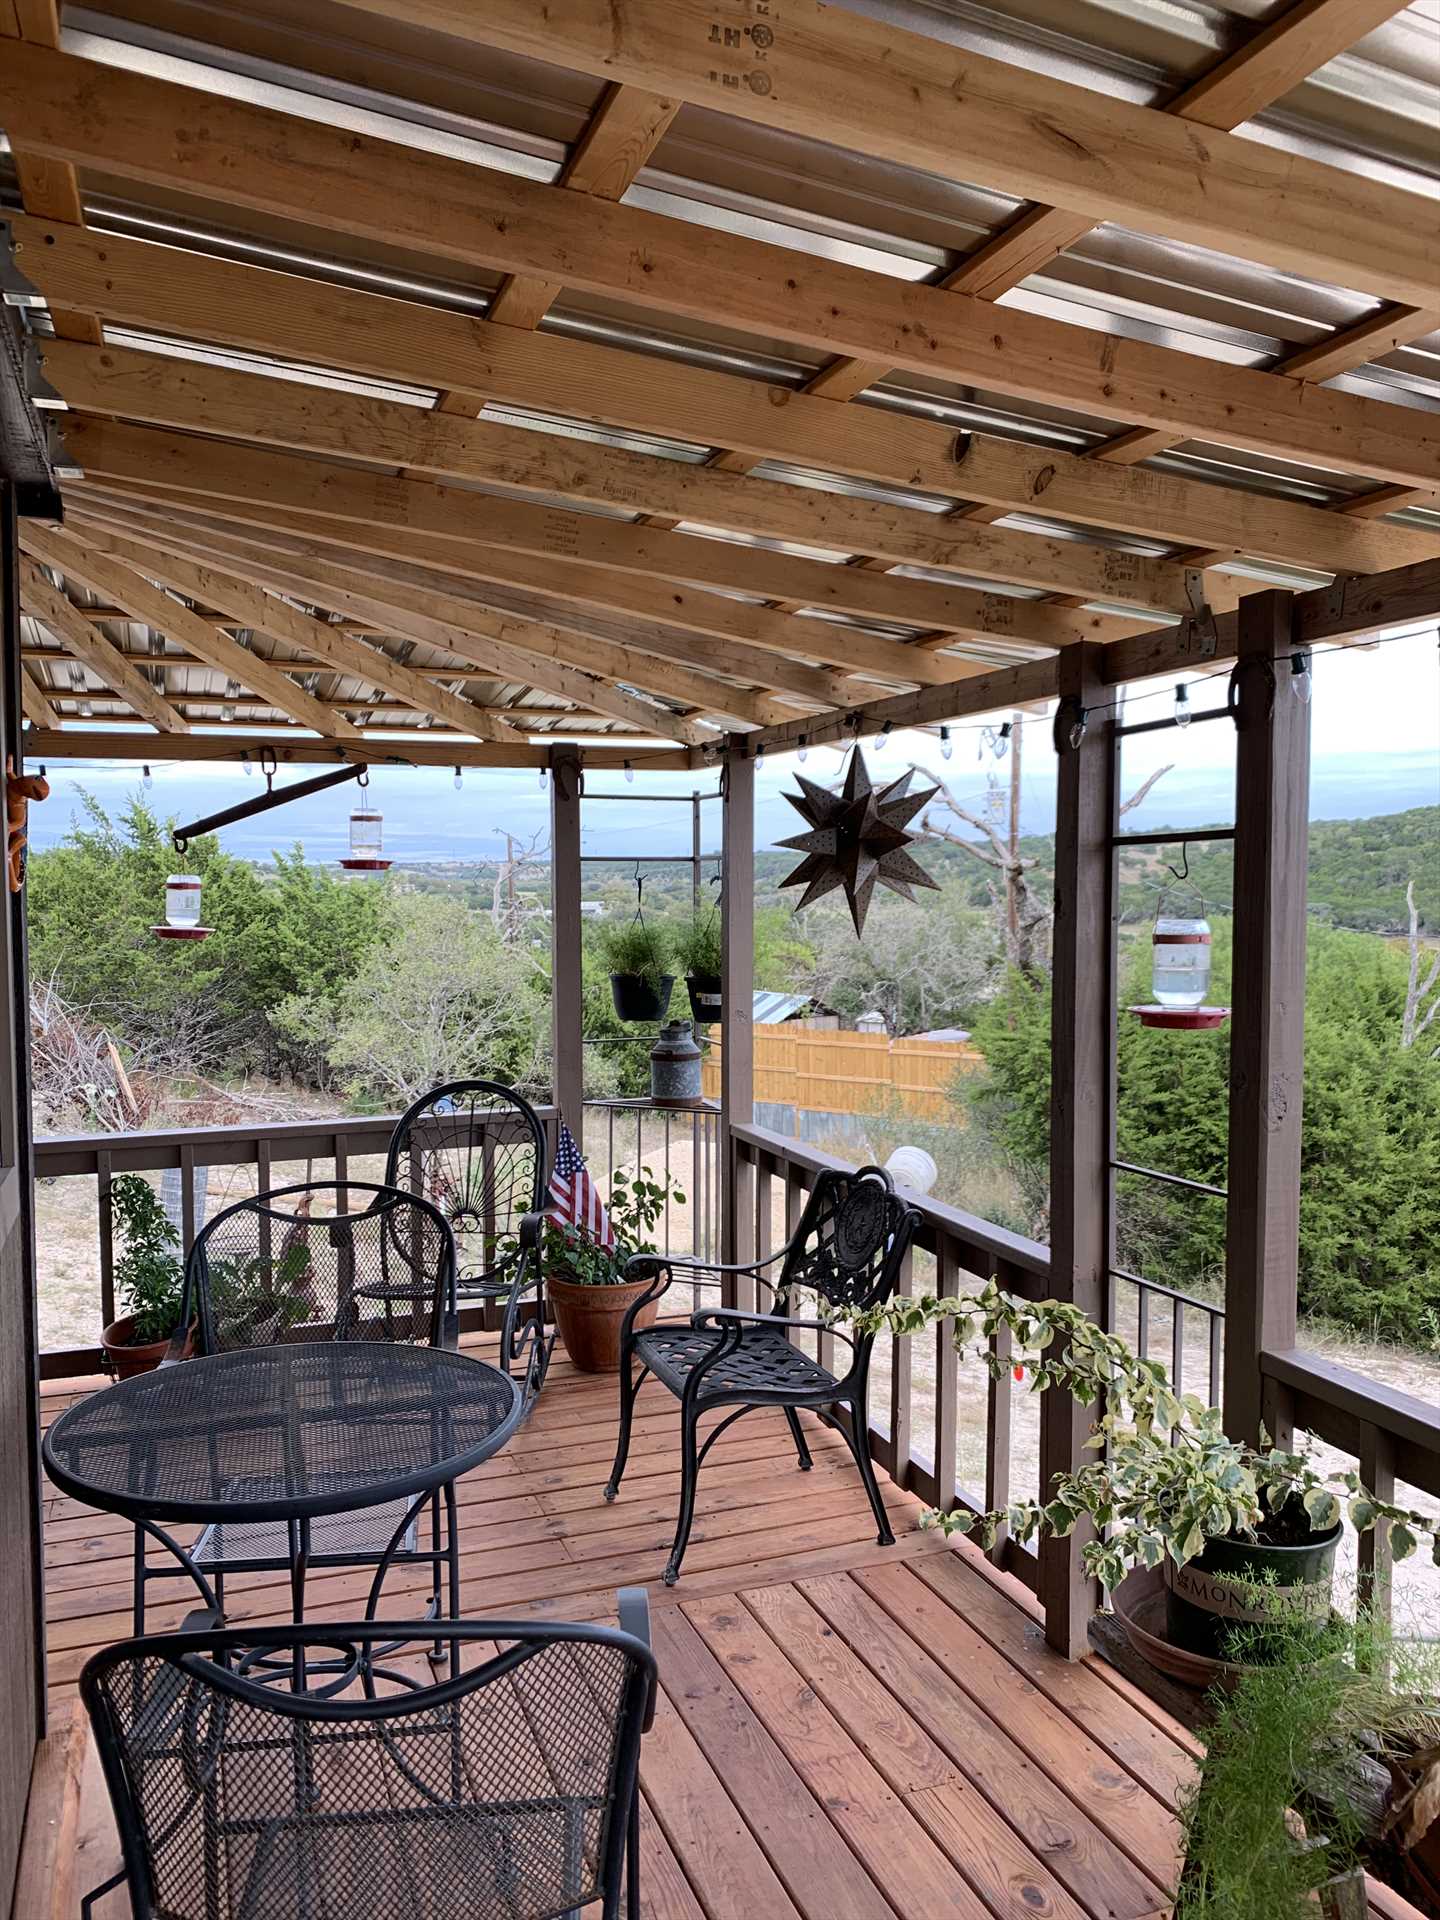                                                 Coffee, wine, and everything else just tastes better in the fresh Hill Country air.